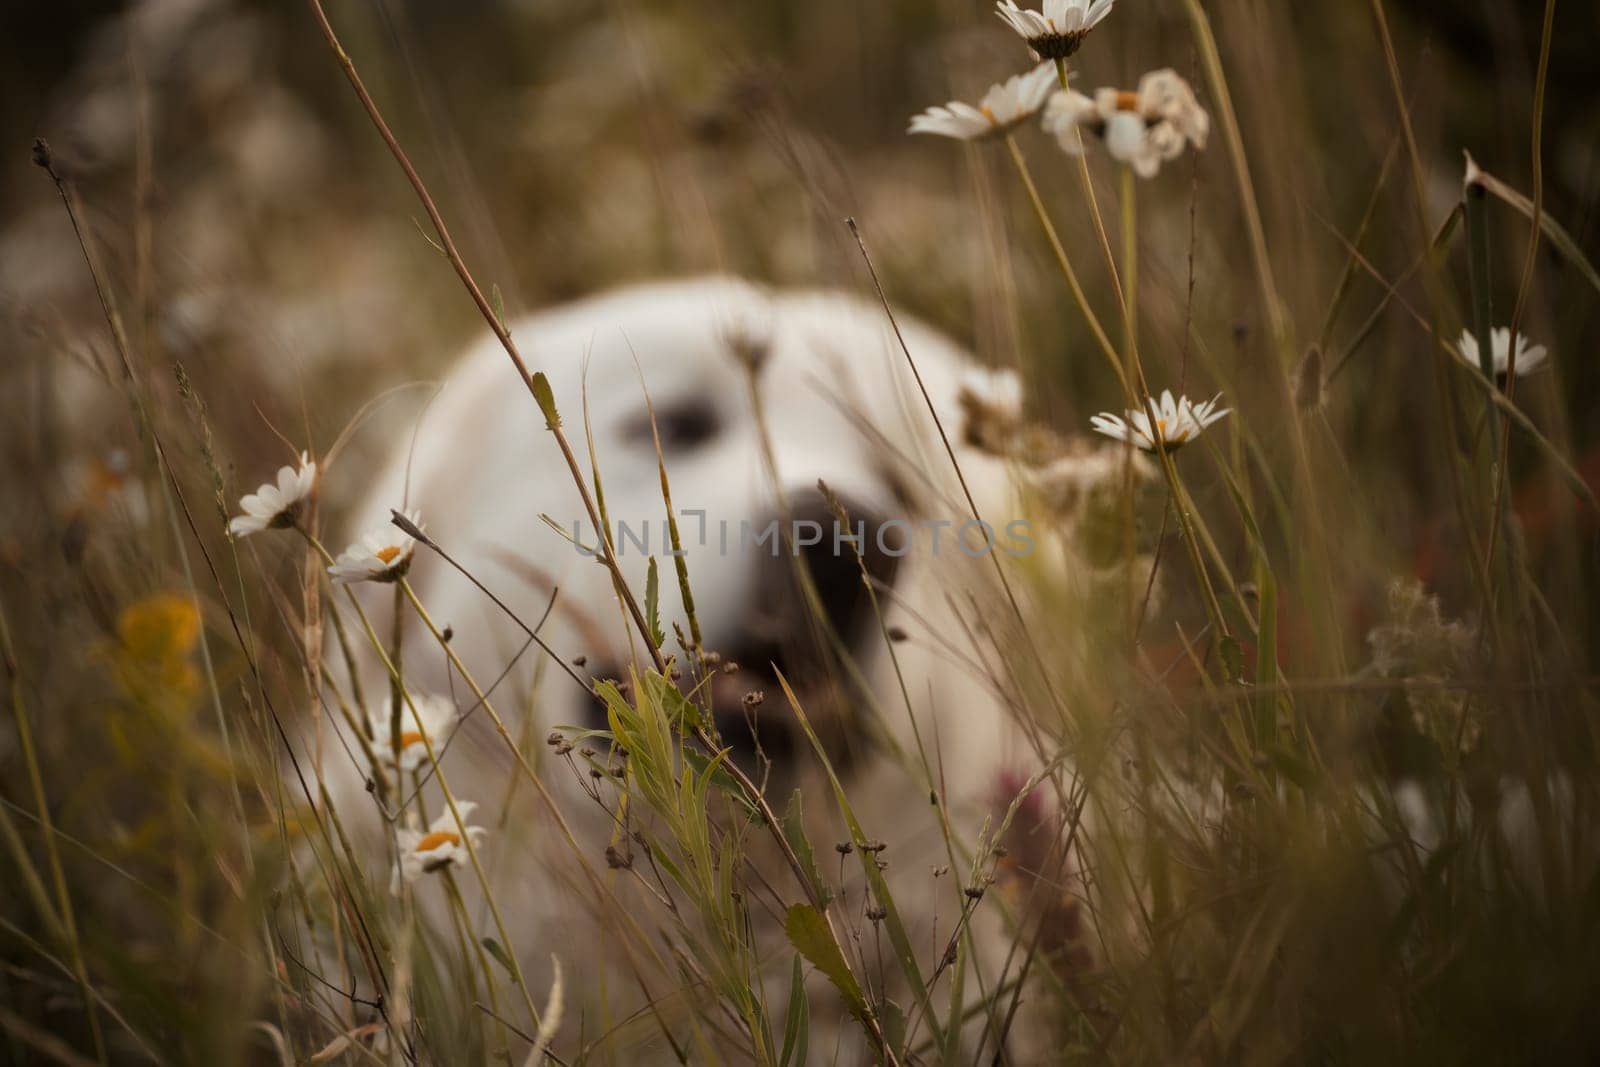 Daisies white dog Maremma Sheepdog in a wreath of daisies sits on a green lawn with wild flowers daisies, walks a pet. Cute photo with a dog in a wreath of daisies. by Matiunina